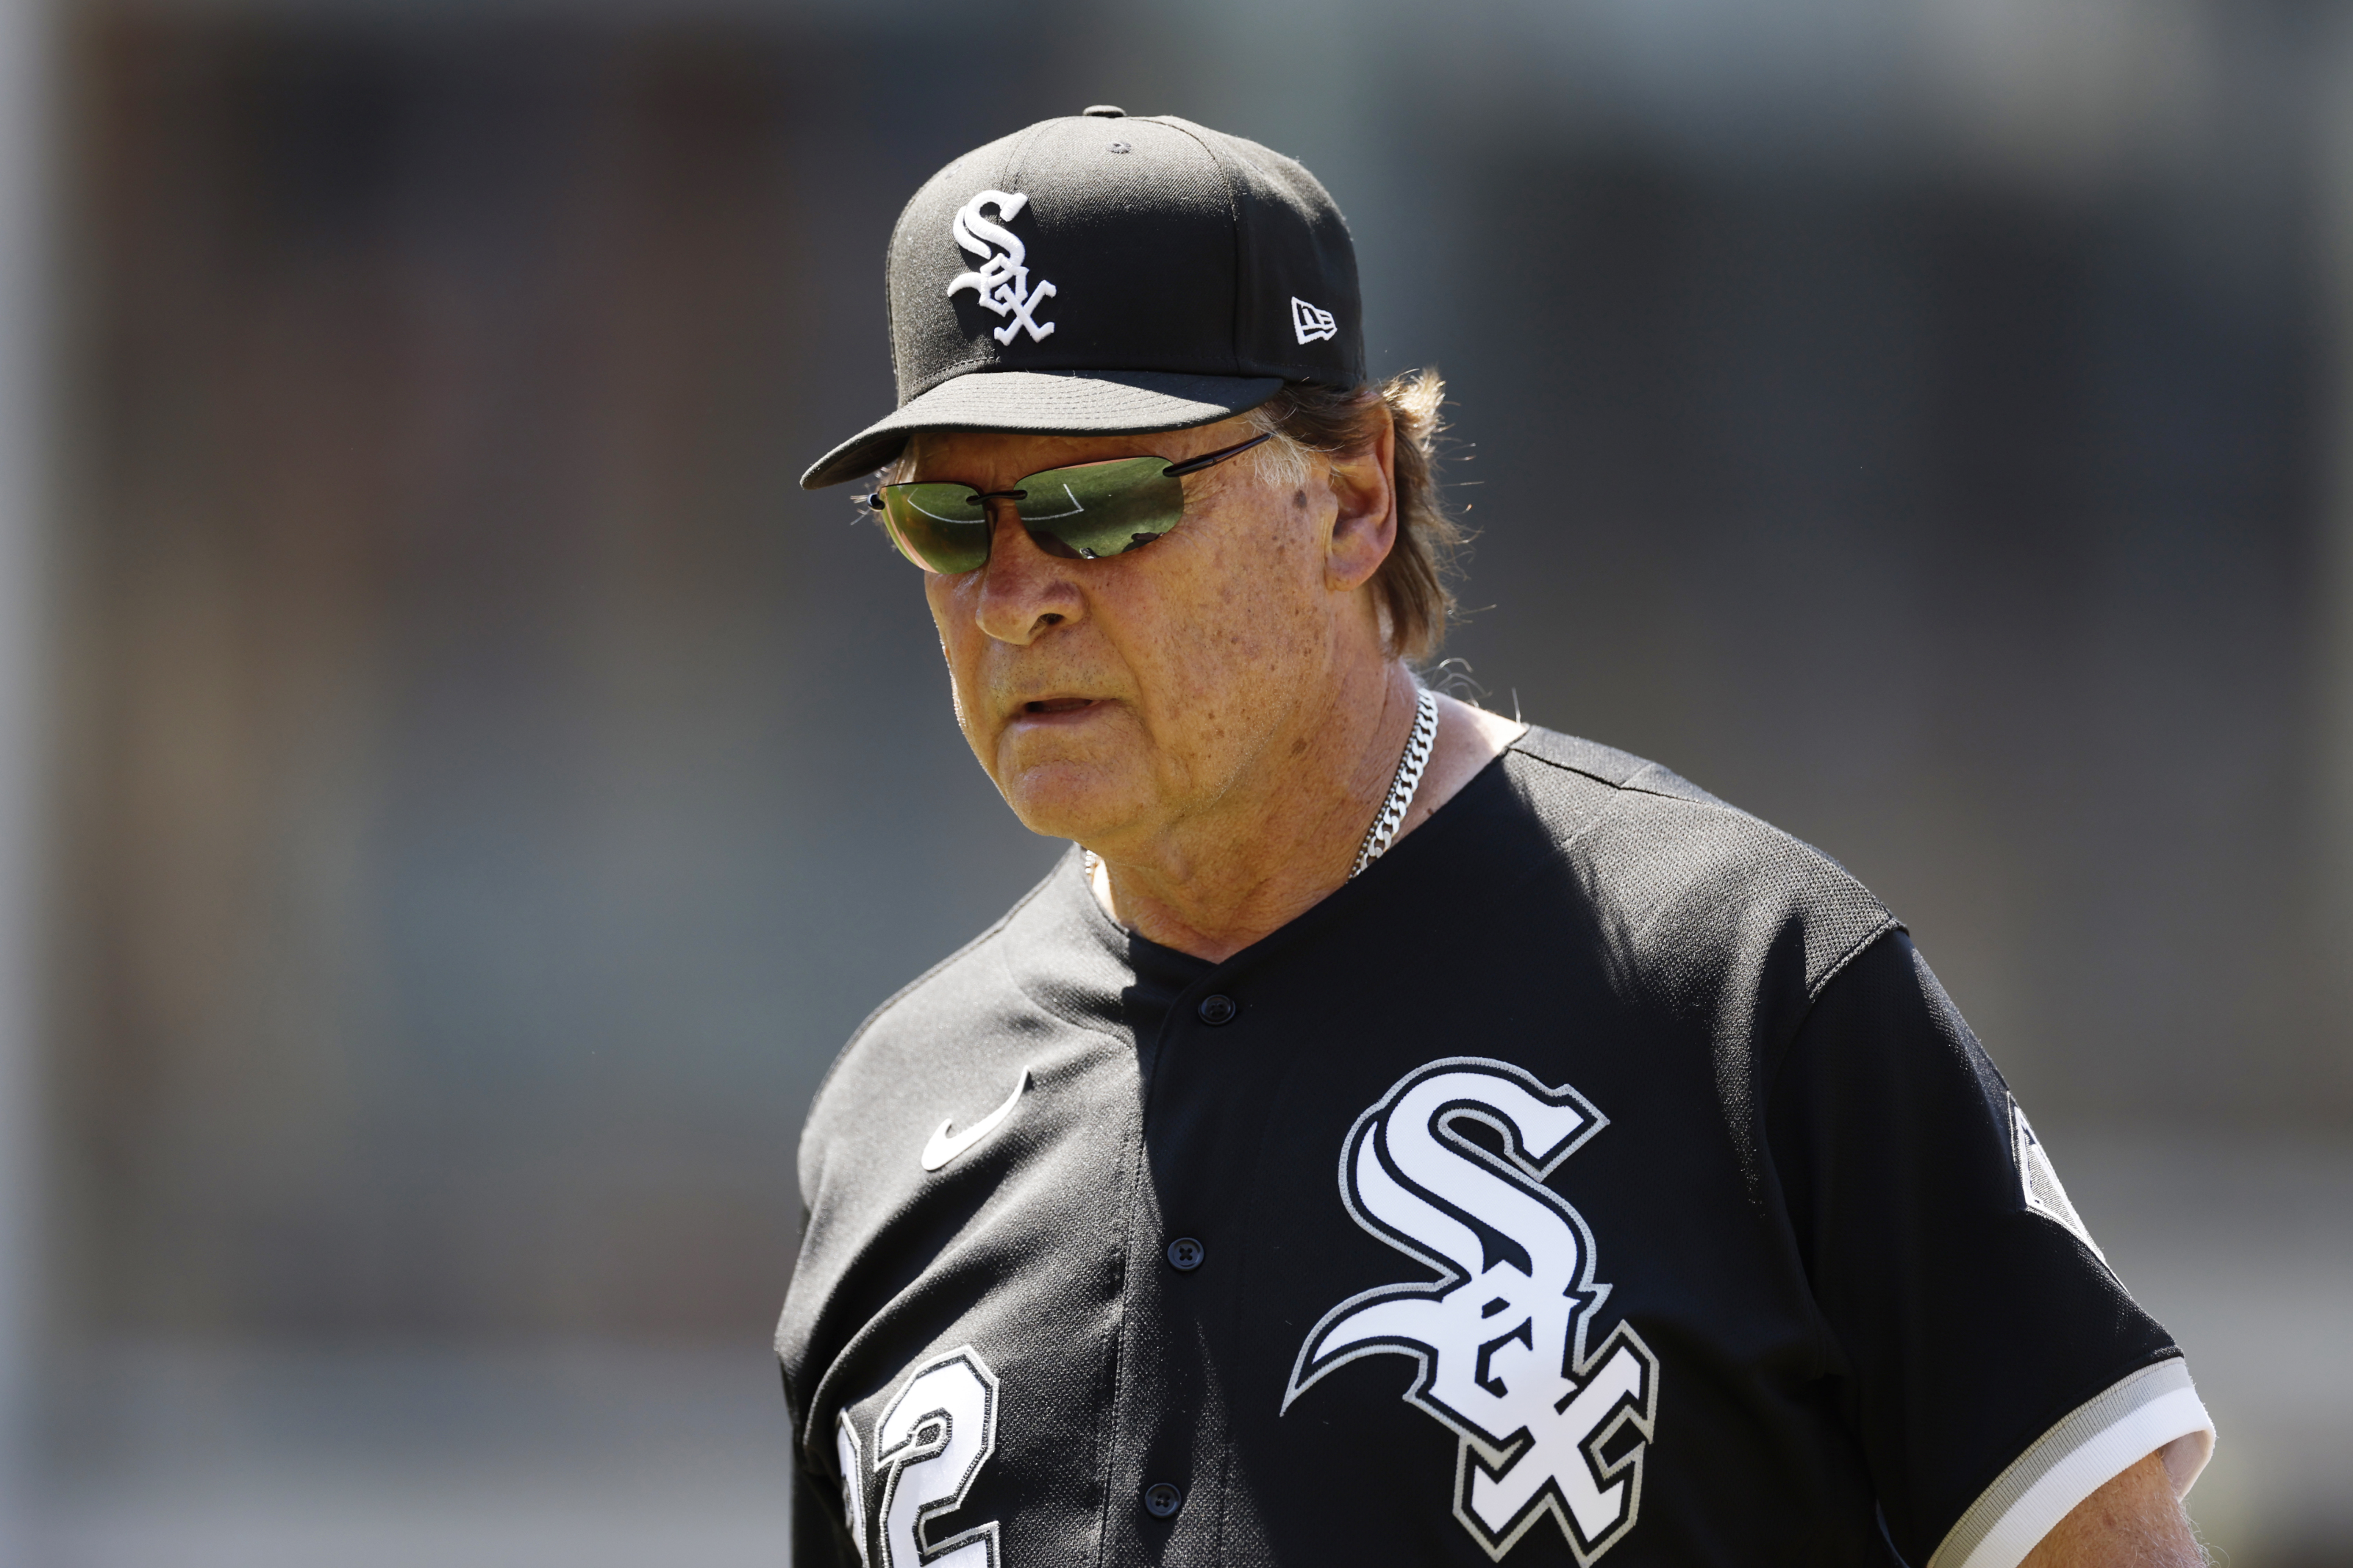 Tony La Russa appears to nod off during White Sox vs. Royals